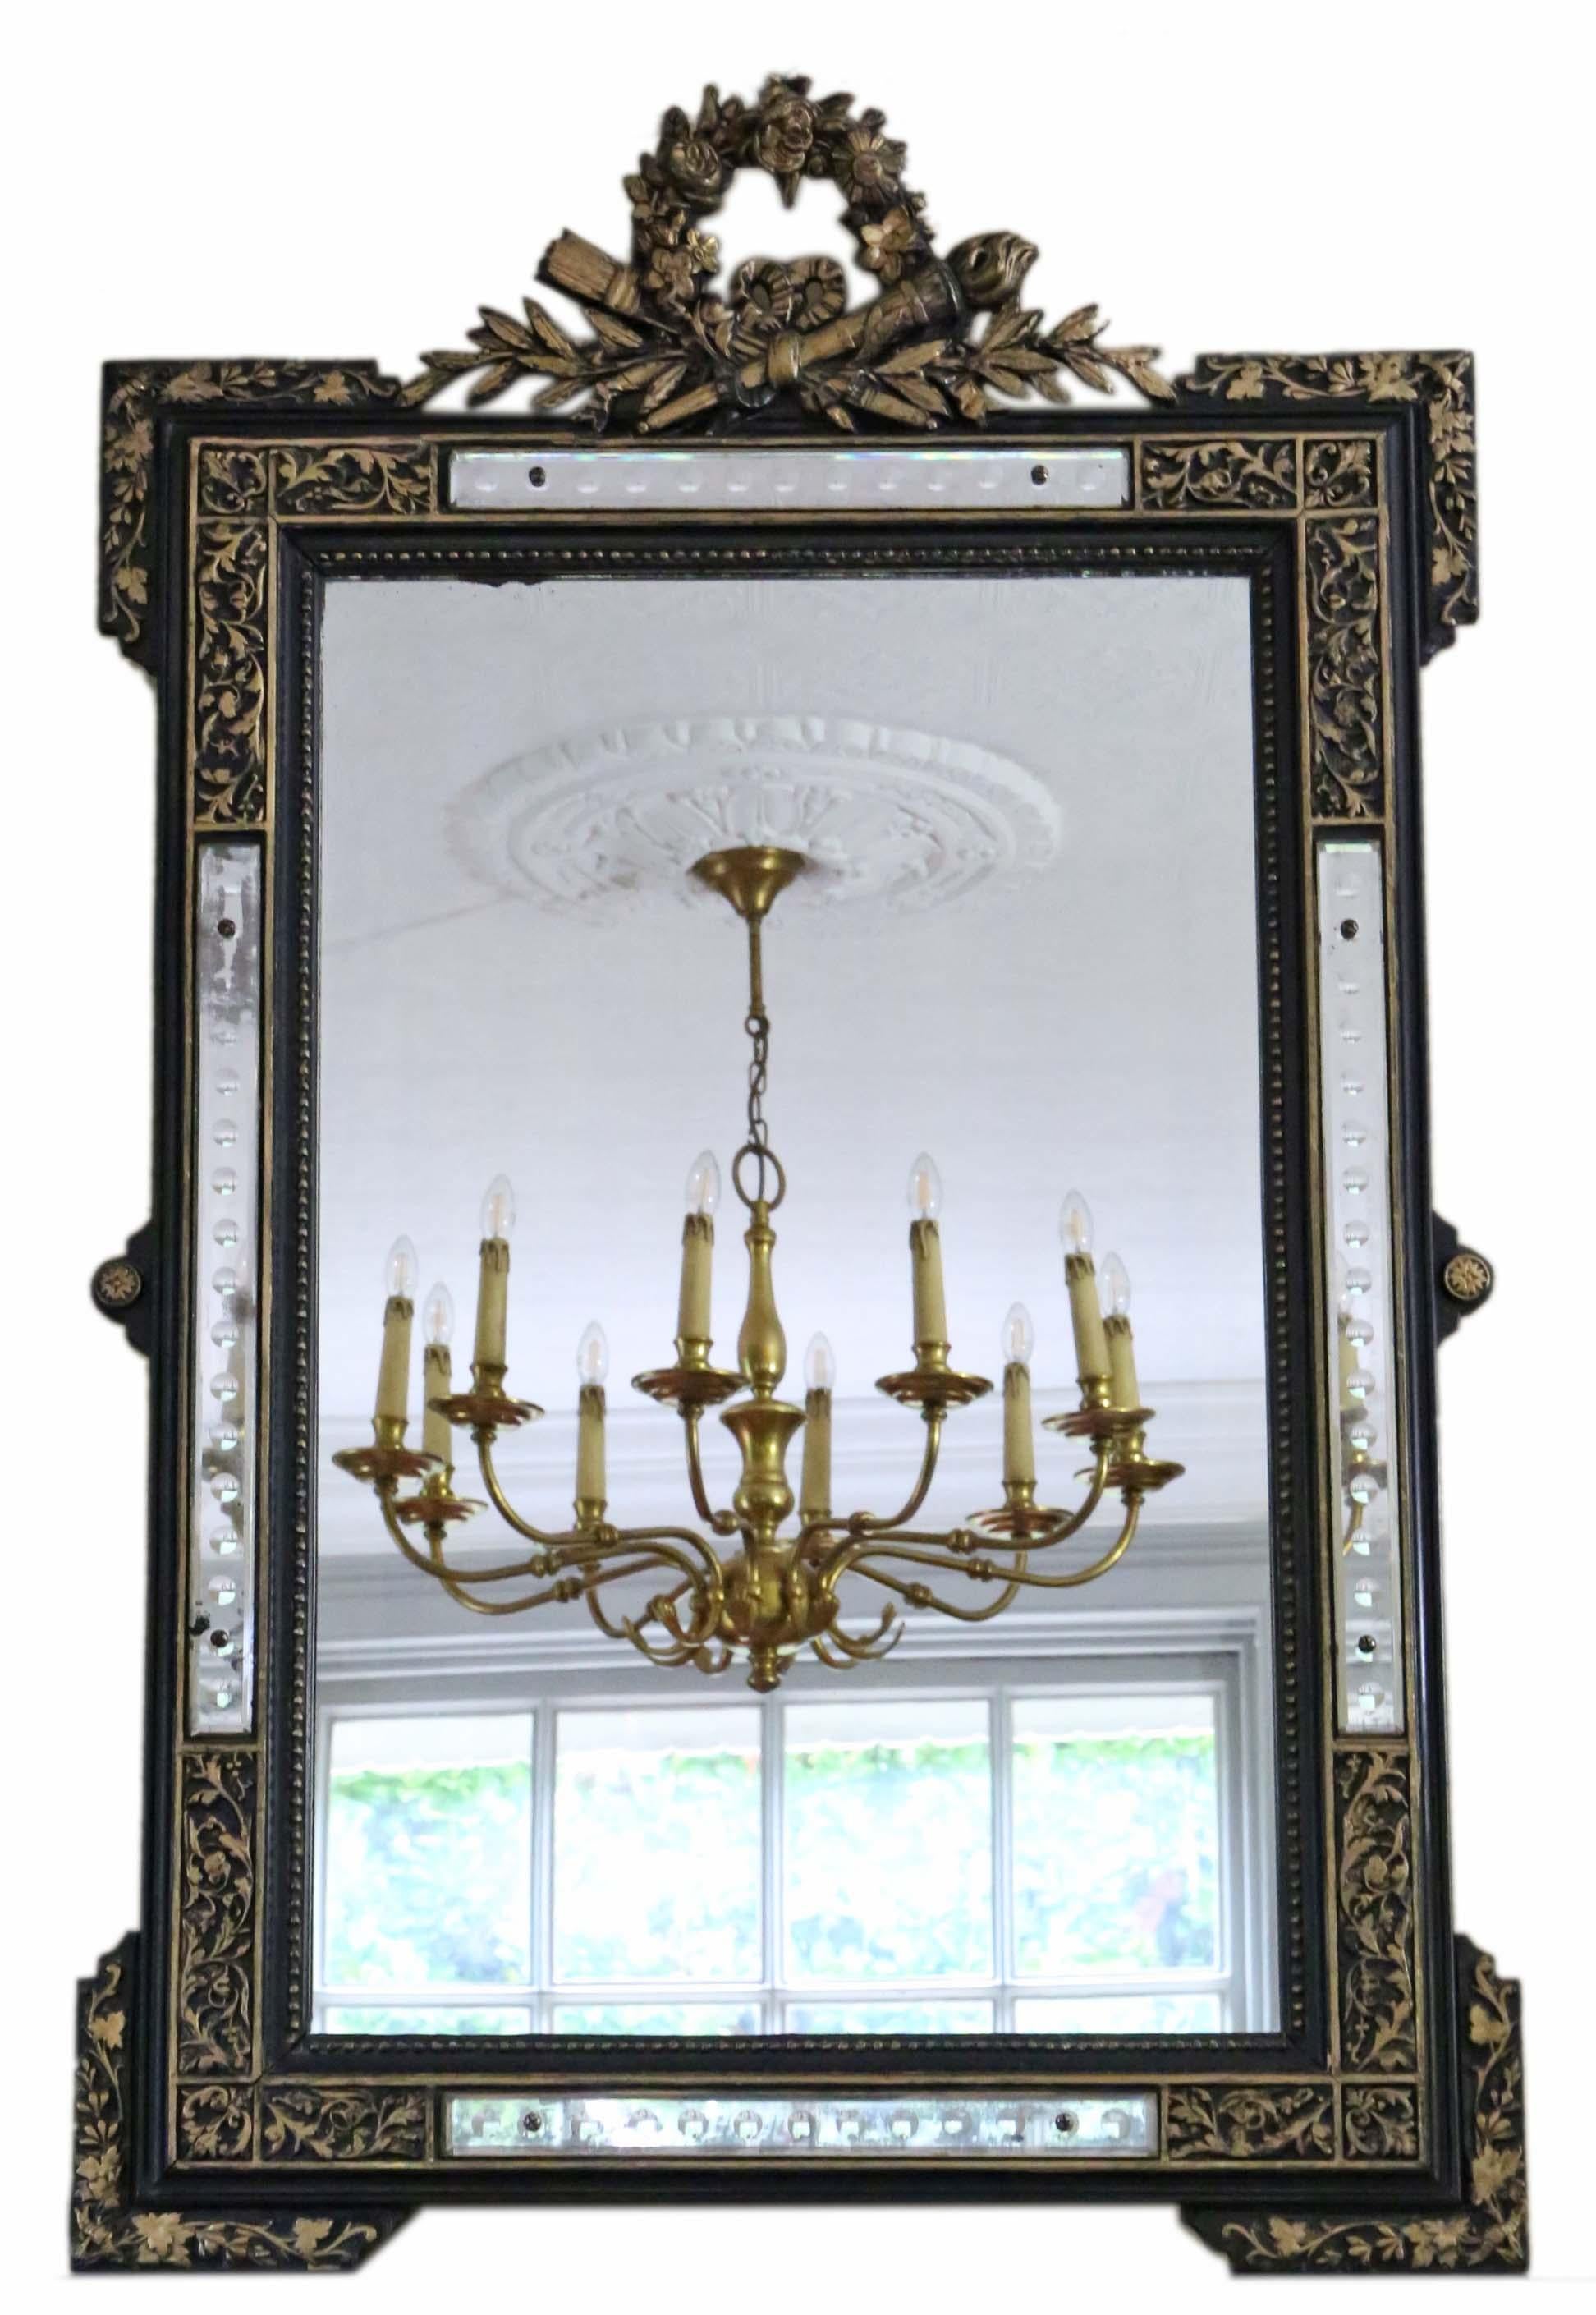 Antique large quality French ebonised and gilt overmantle wall mirror 19th century.

An impressive and rare find, that would look amazing in the right location. No loose joints or woodworm. Original back.

Some original finish remaining, with